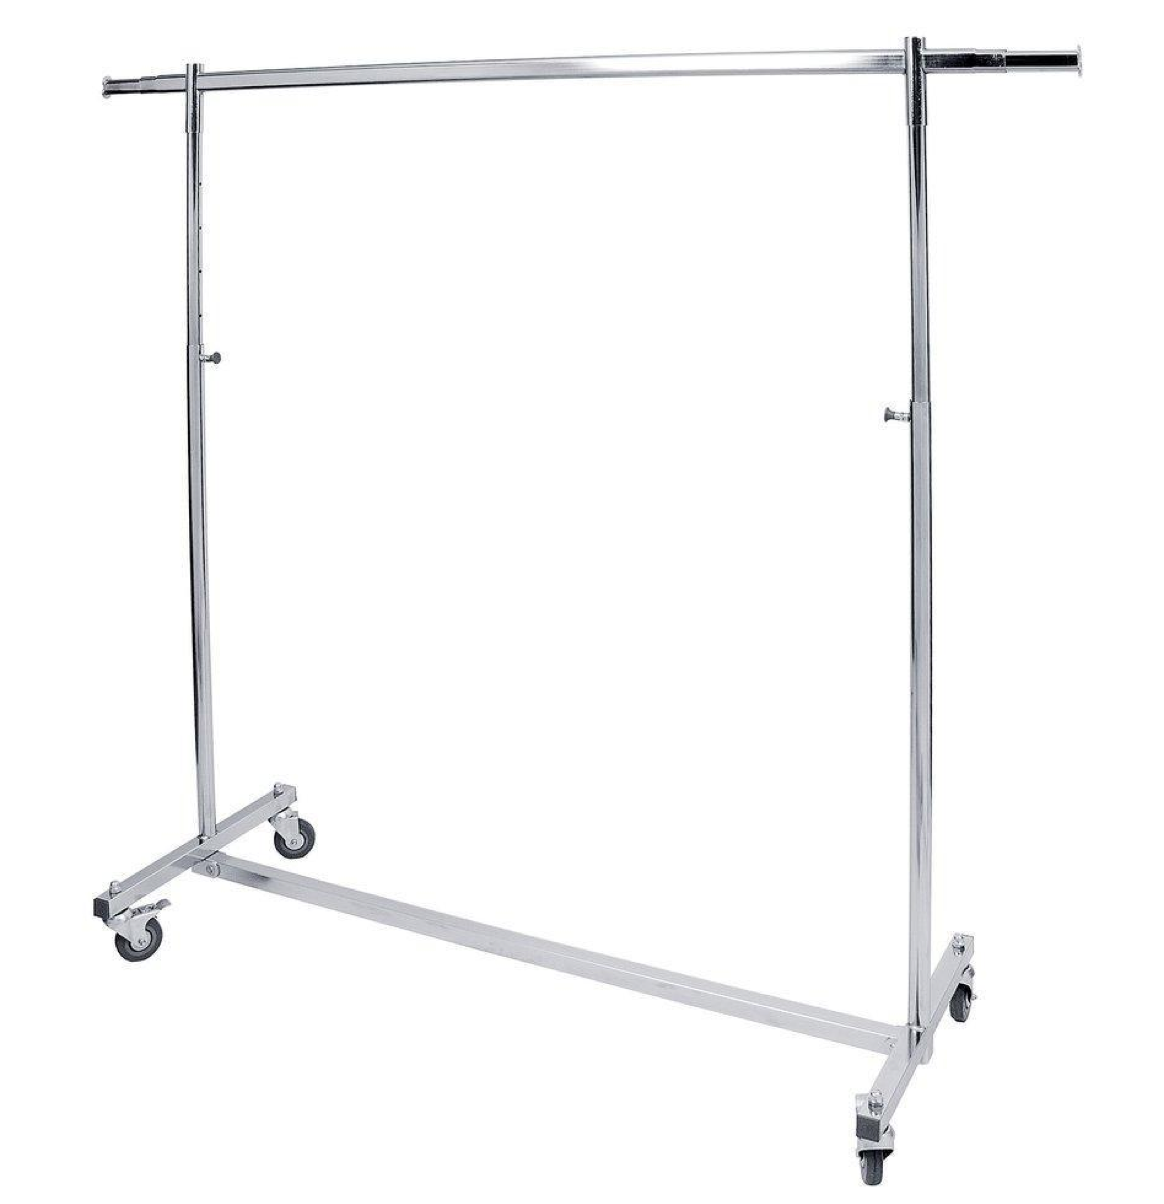 Clothes hanger stand with wheels - Cinefacility